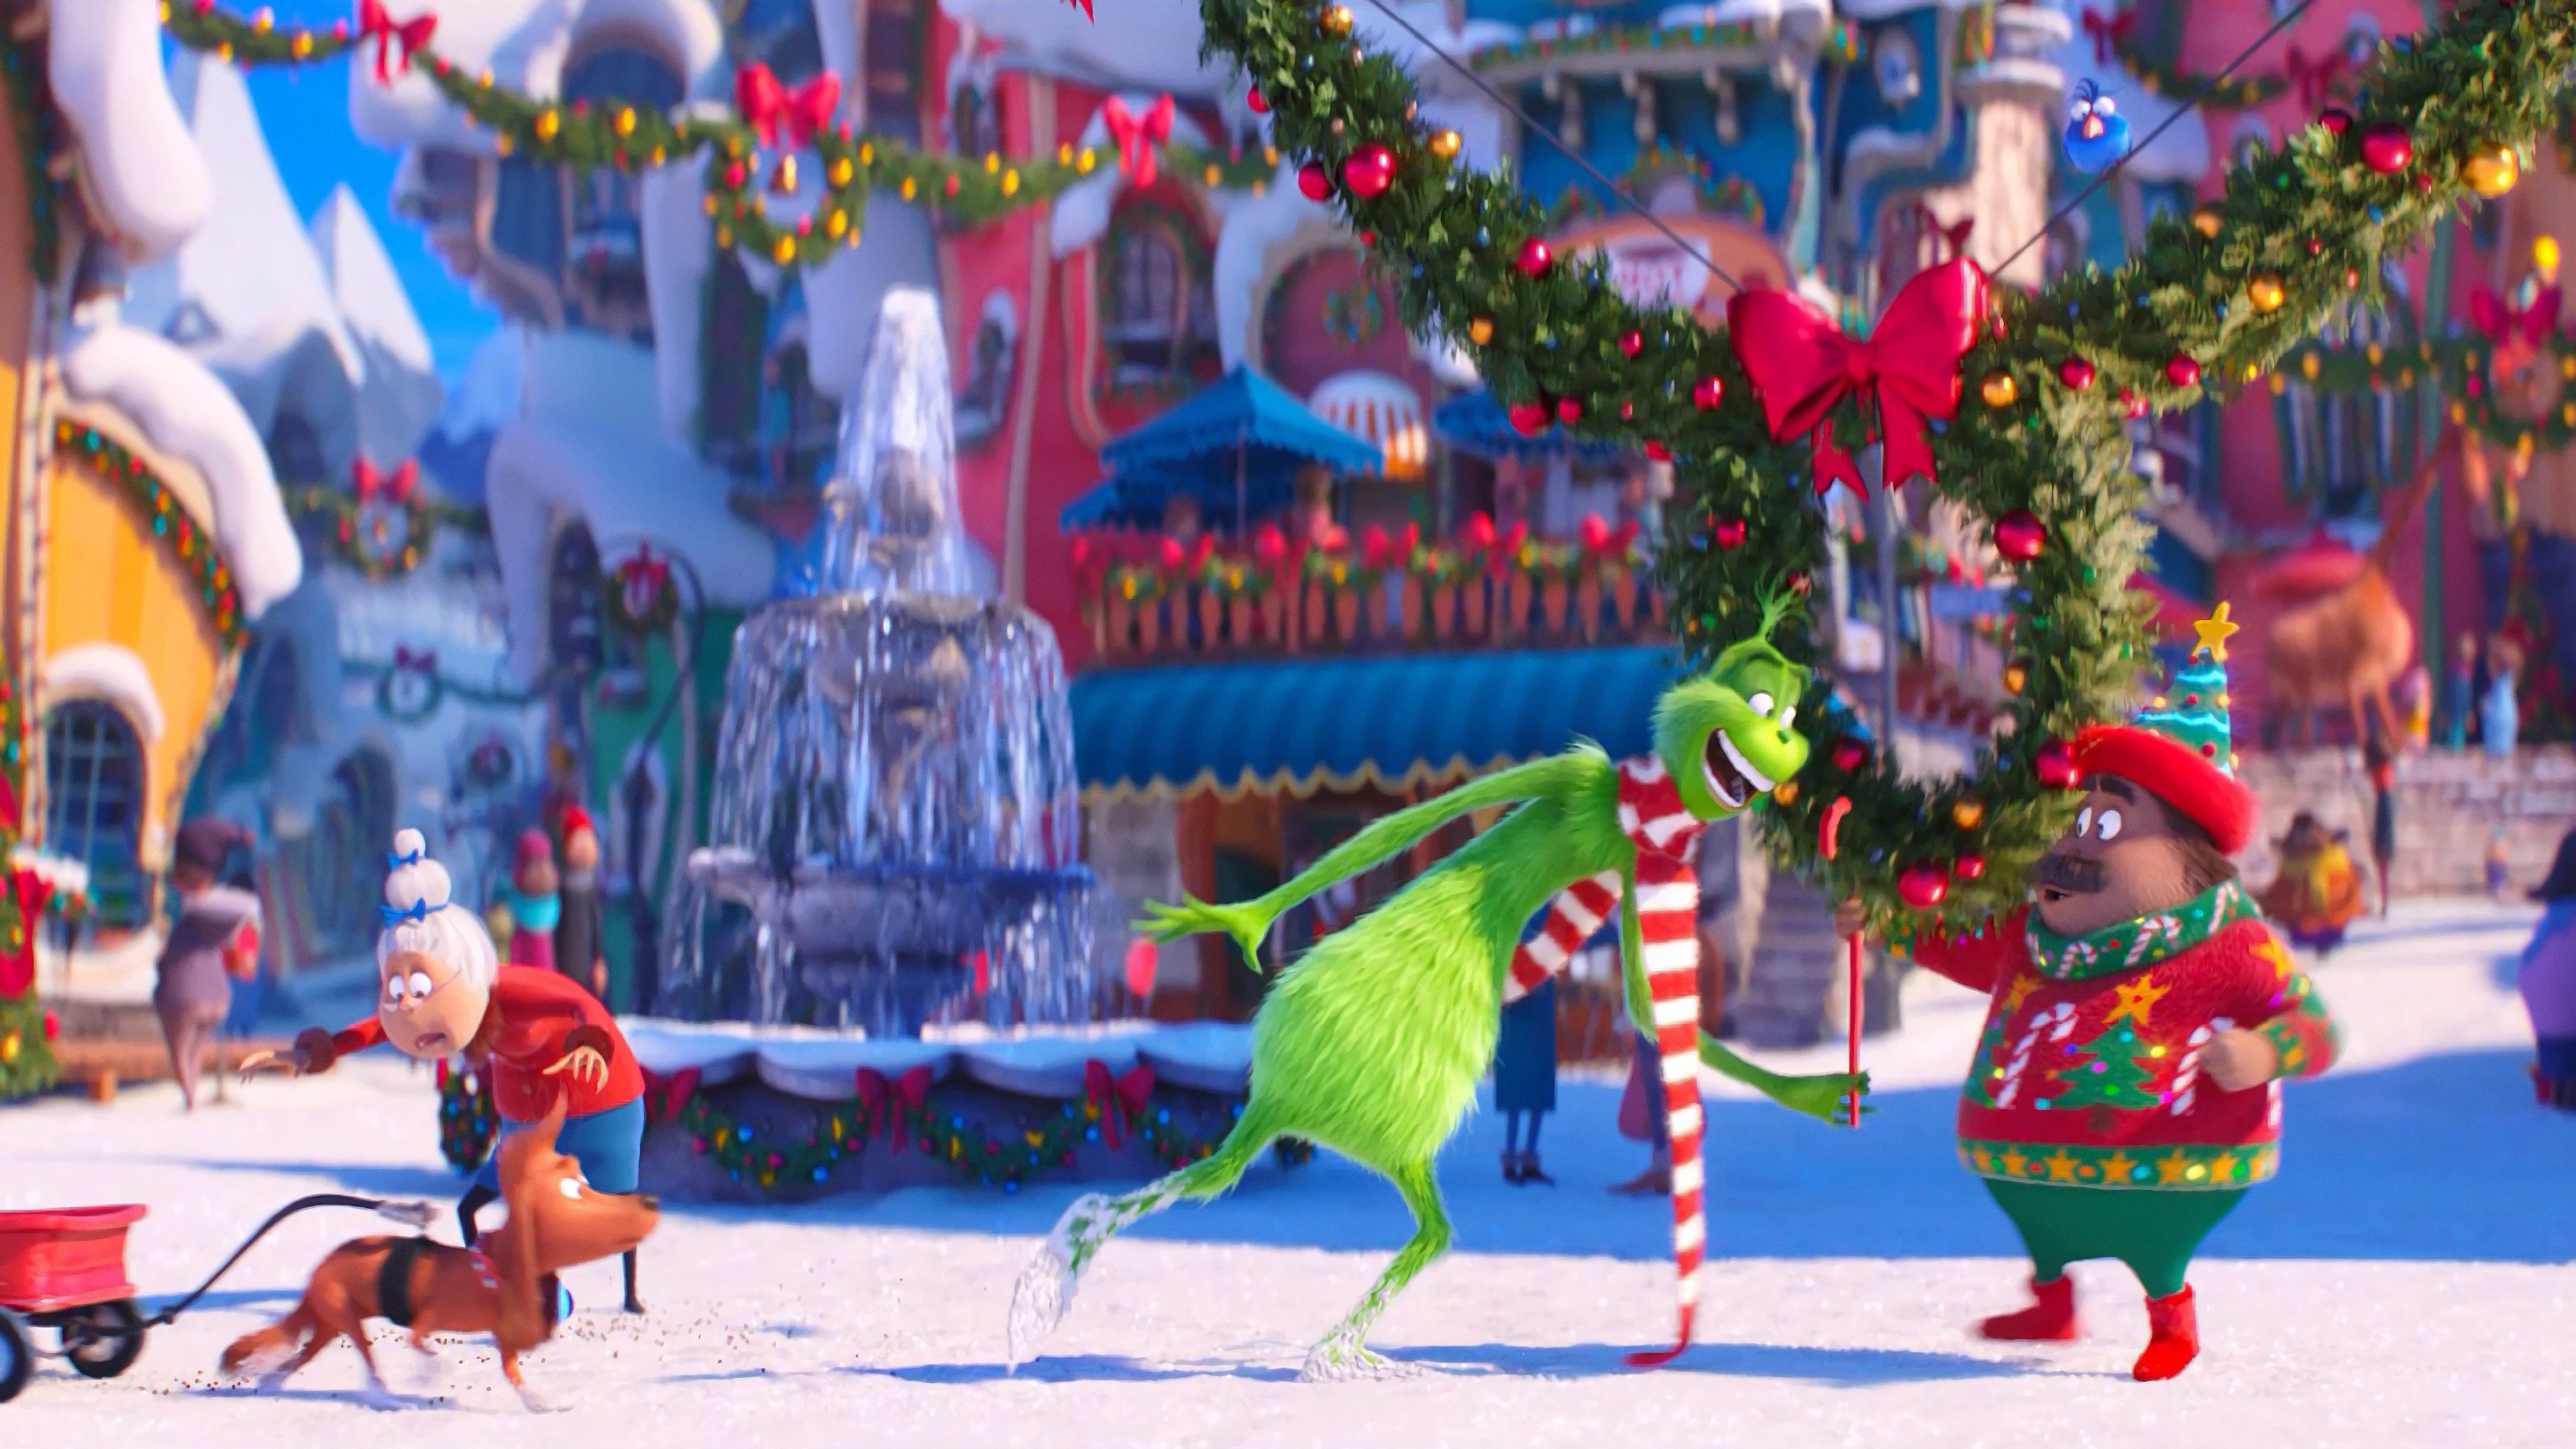 The Grinch Movie 2018 Wallpapers